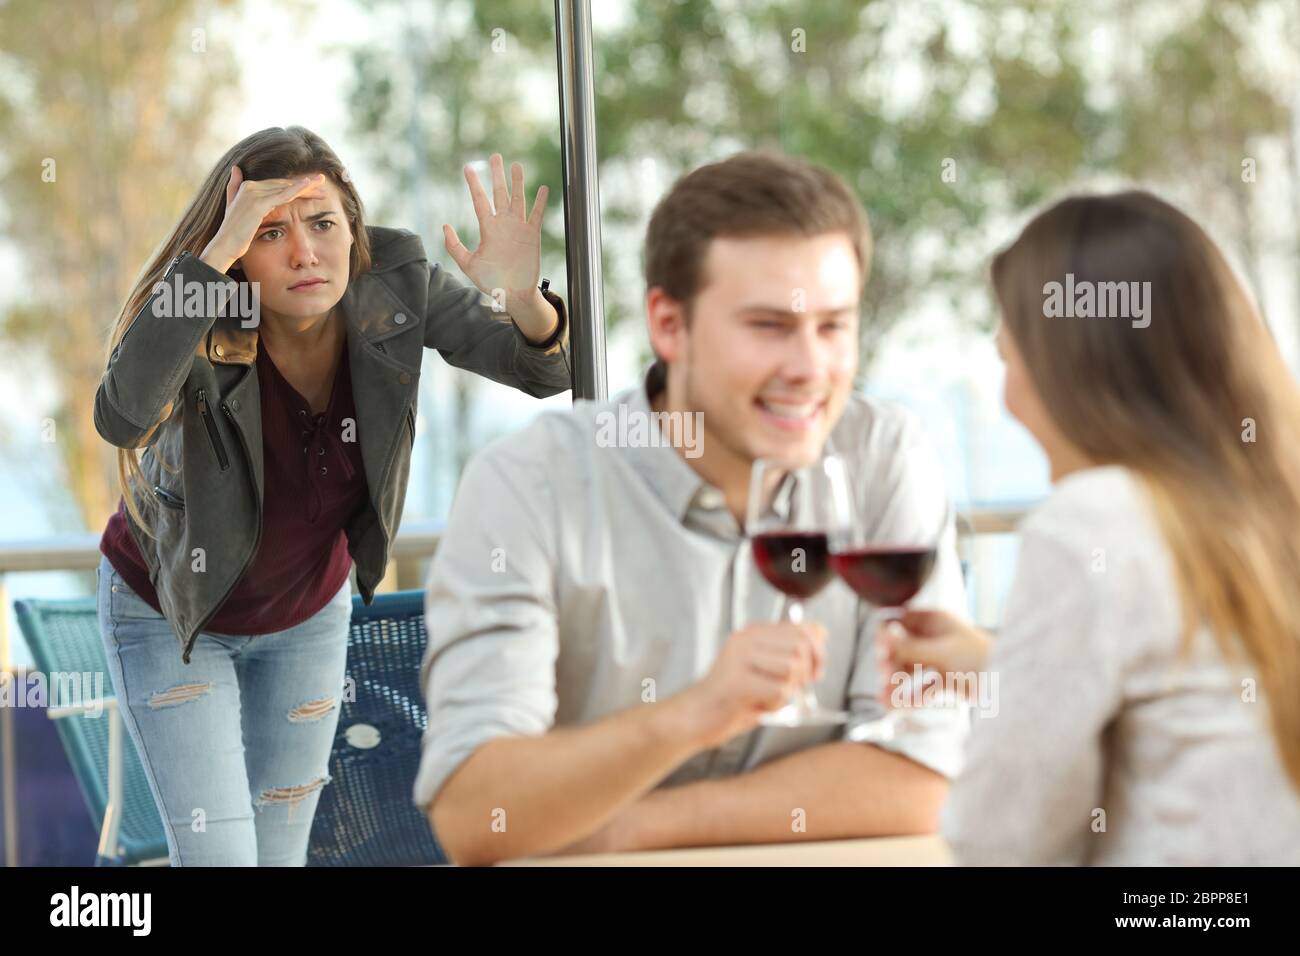 Stalker ex girlfriend spying on a couple in a coffee shop Stock Photo